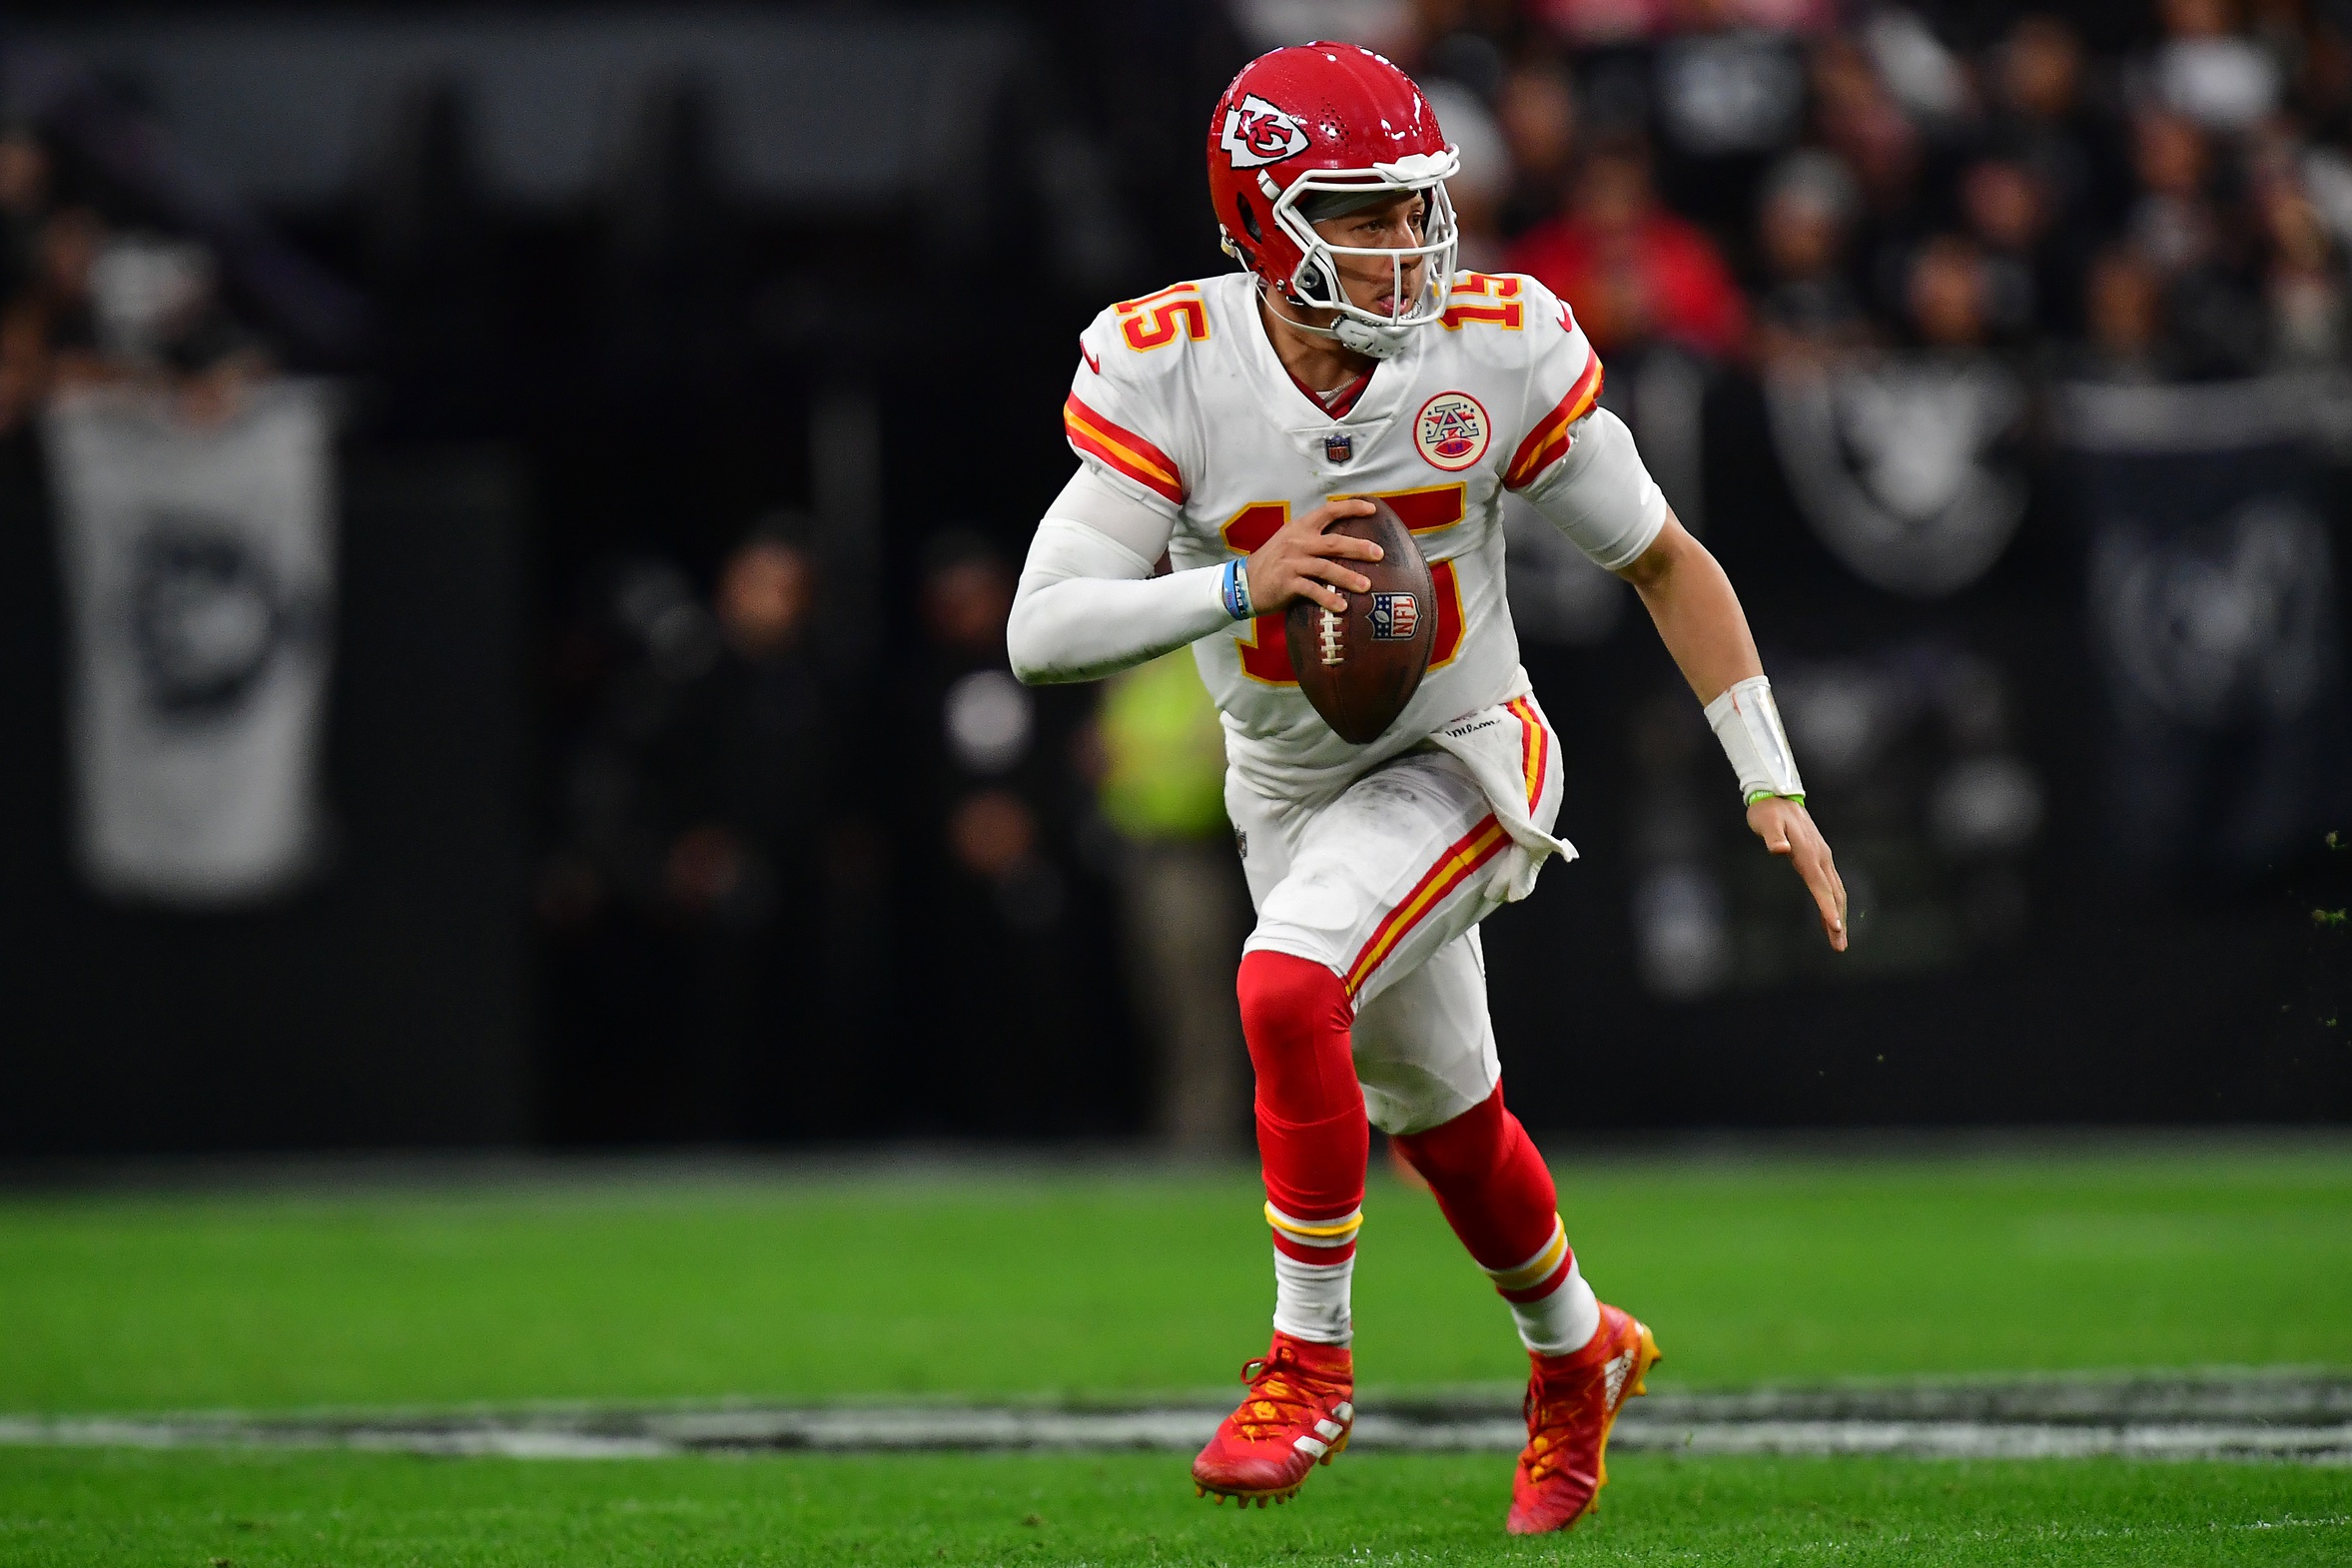 Chad Henne replaces injured Chiefs QB Patrick Mahomes in second